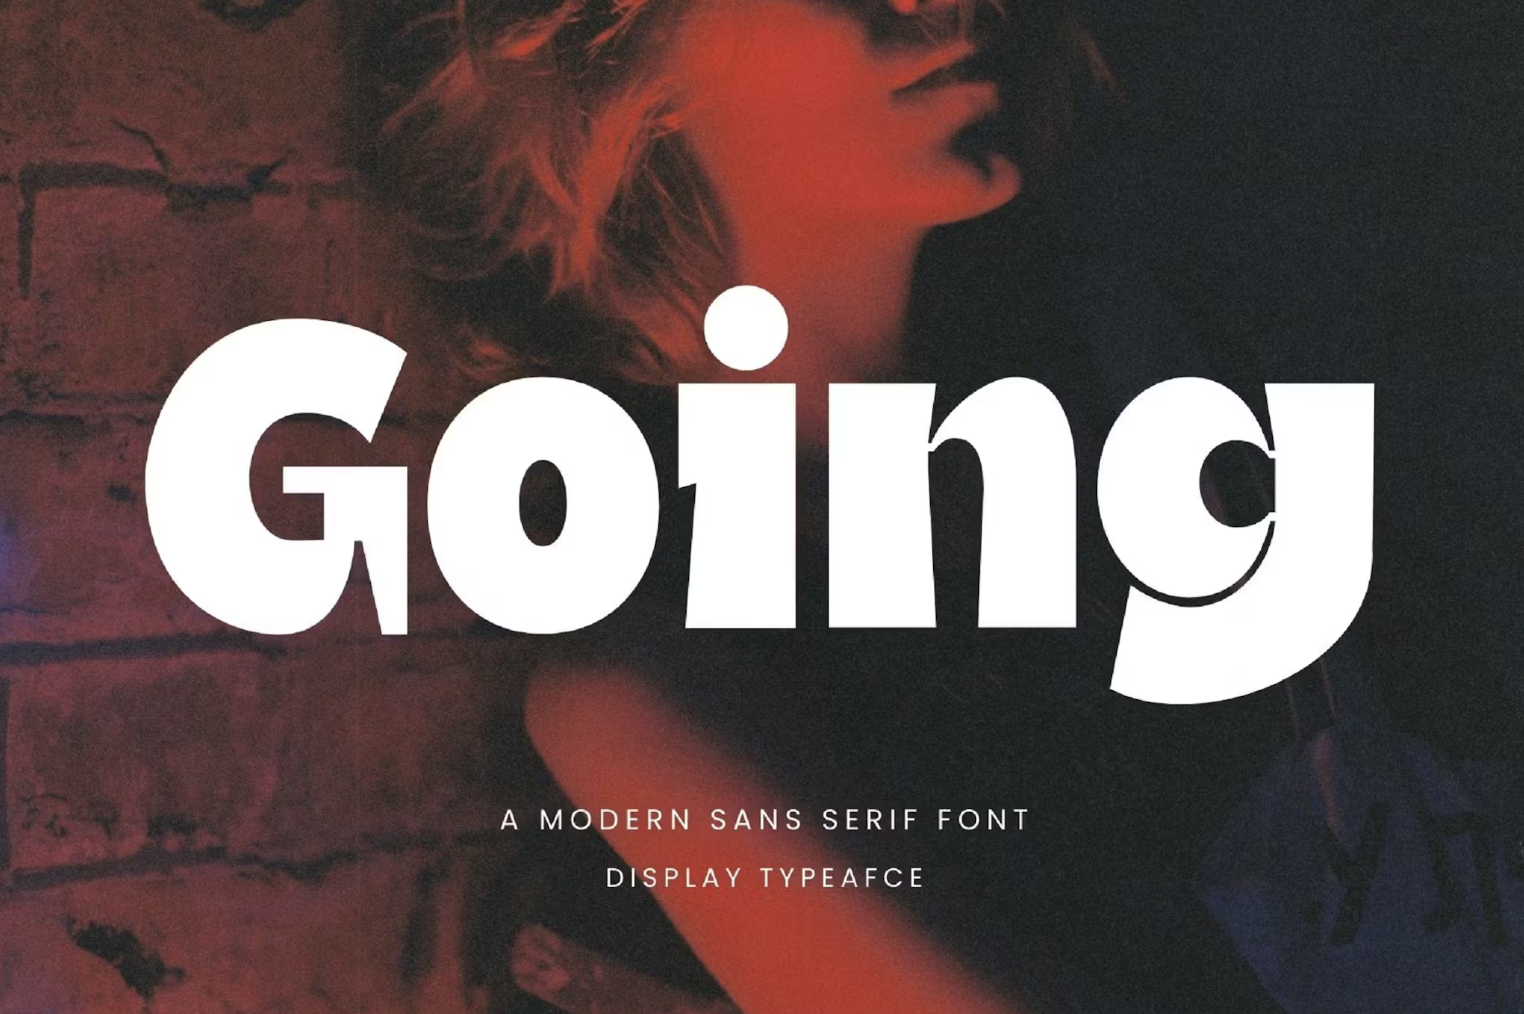 Going Modern Sans Serif Font Typeface by Graphicxell